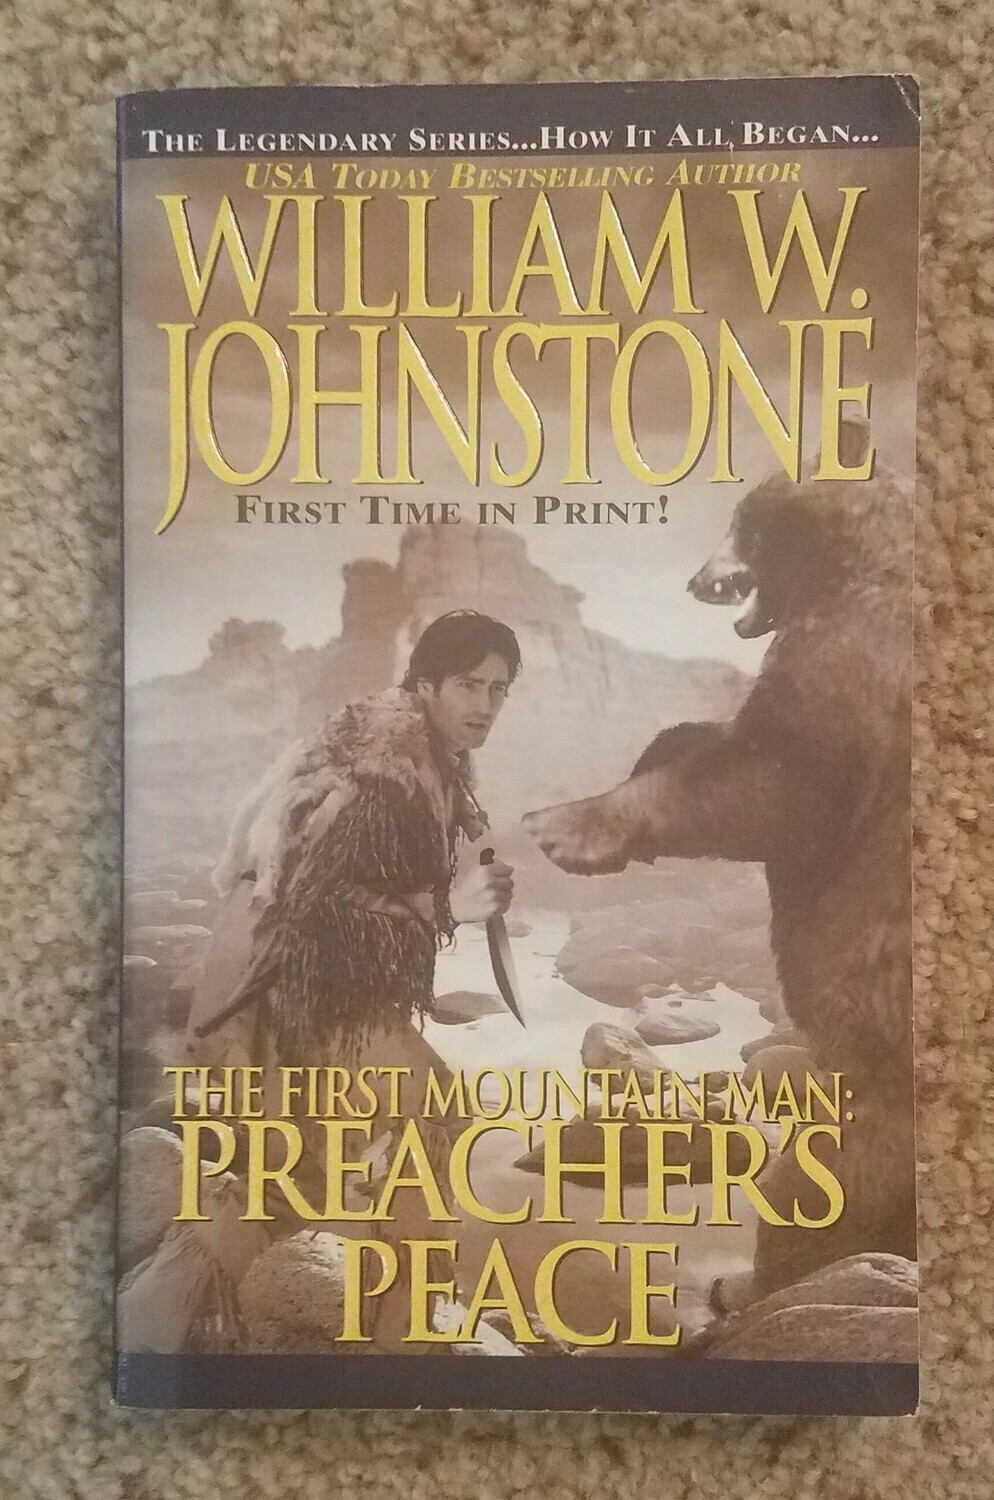 The First Mountain Man: Preacher's Peace by William W. Johnstone